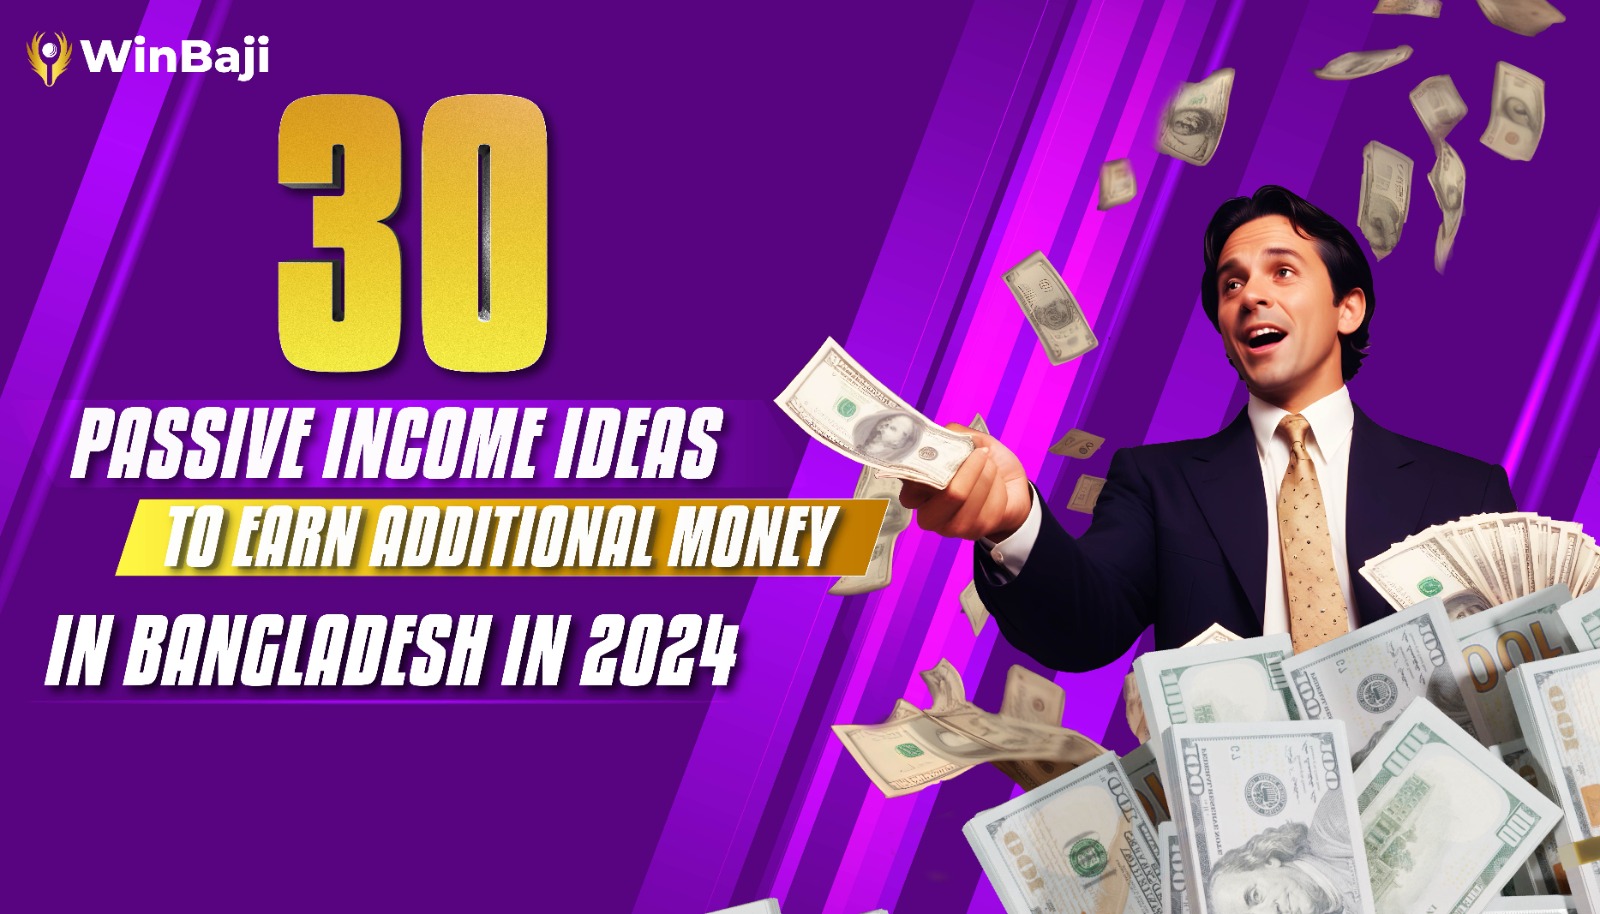 30 Passive Income Ideas To Earn Additional Money in Bangladesh in 2024